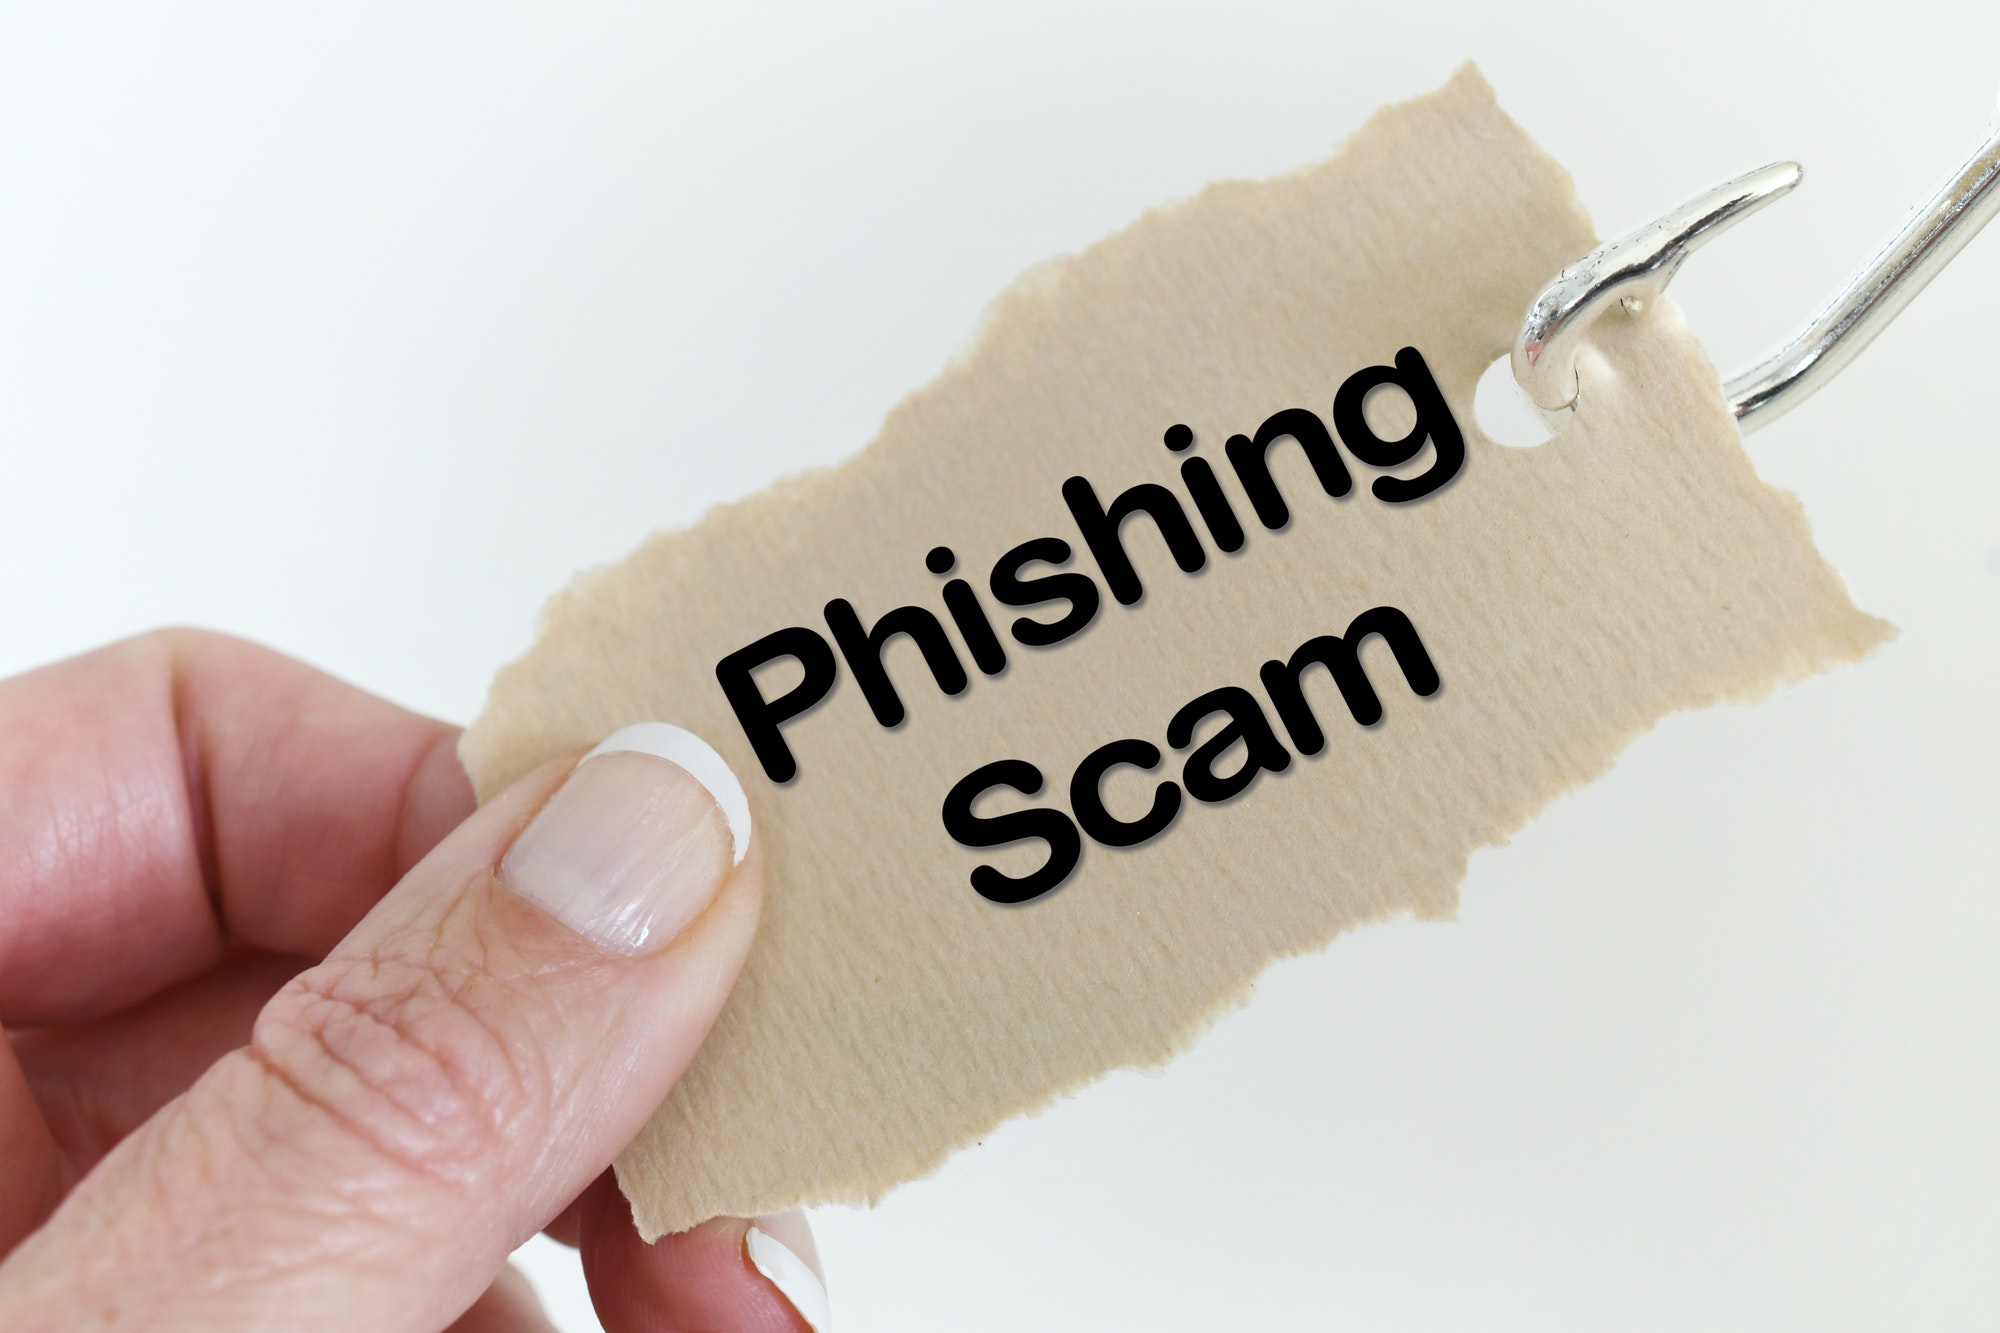 Online phishing scam concept - trying to steal your information